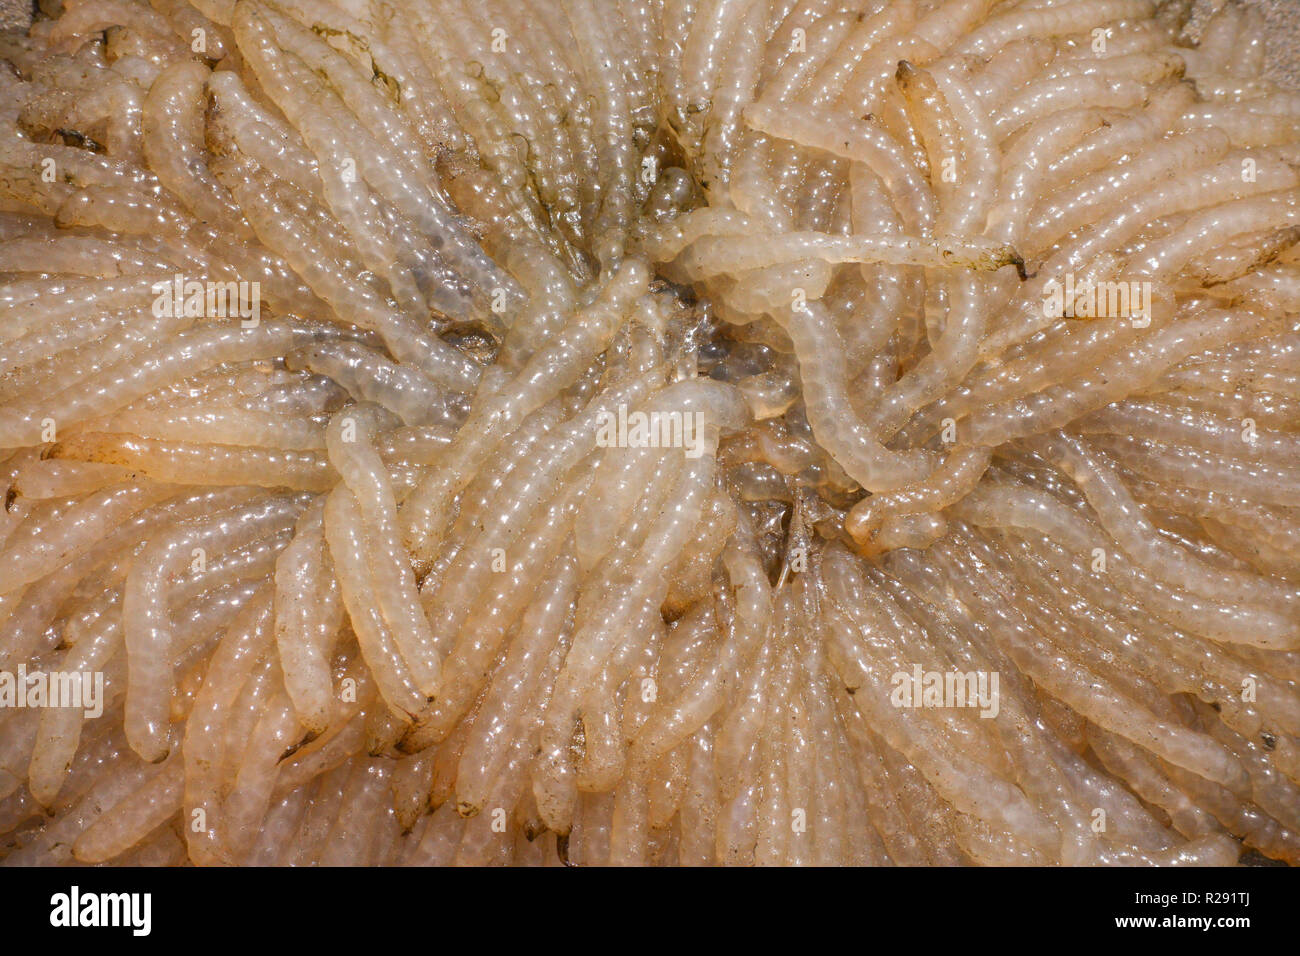 A close up of a mass of squid eggs washed up on a beach in West Wales, UK Stock Photo